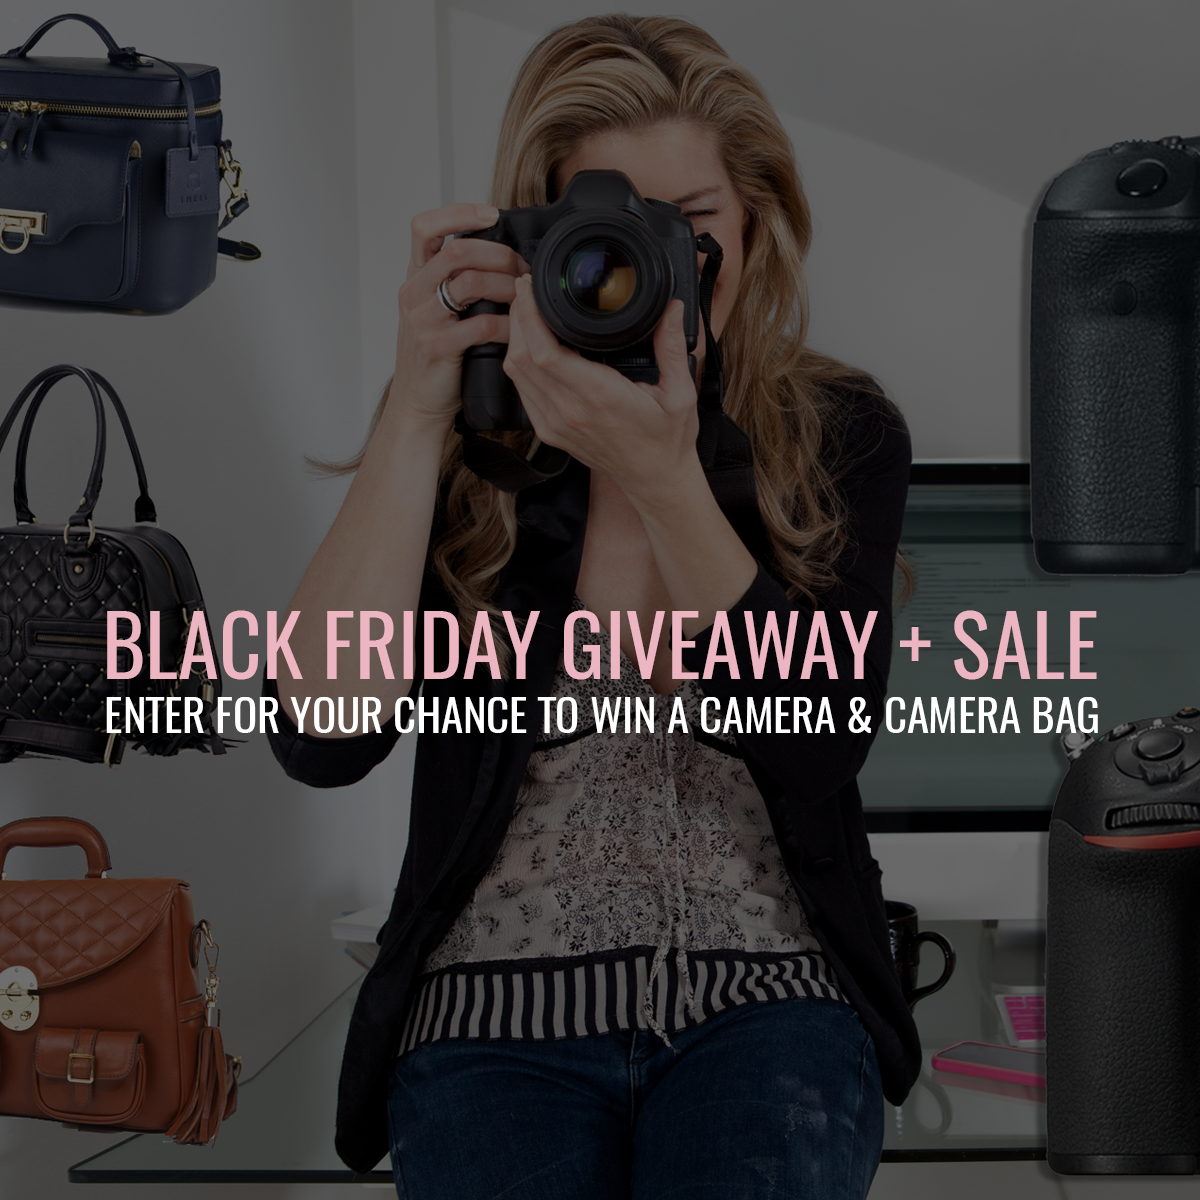 summeranan-photoshop-actions-for-photographers-blackfriday-camera-giveaway-and-sale